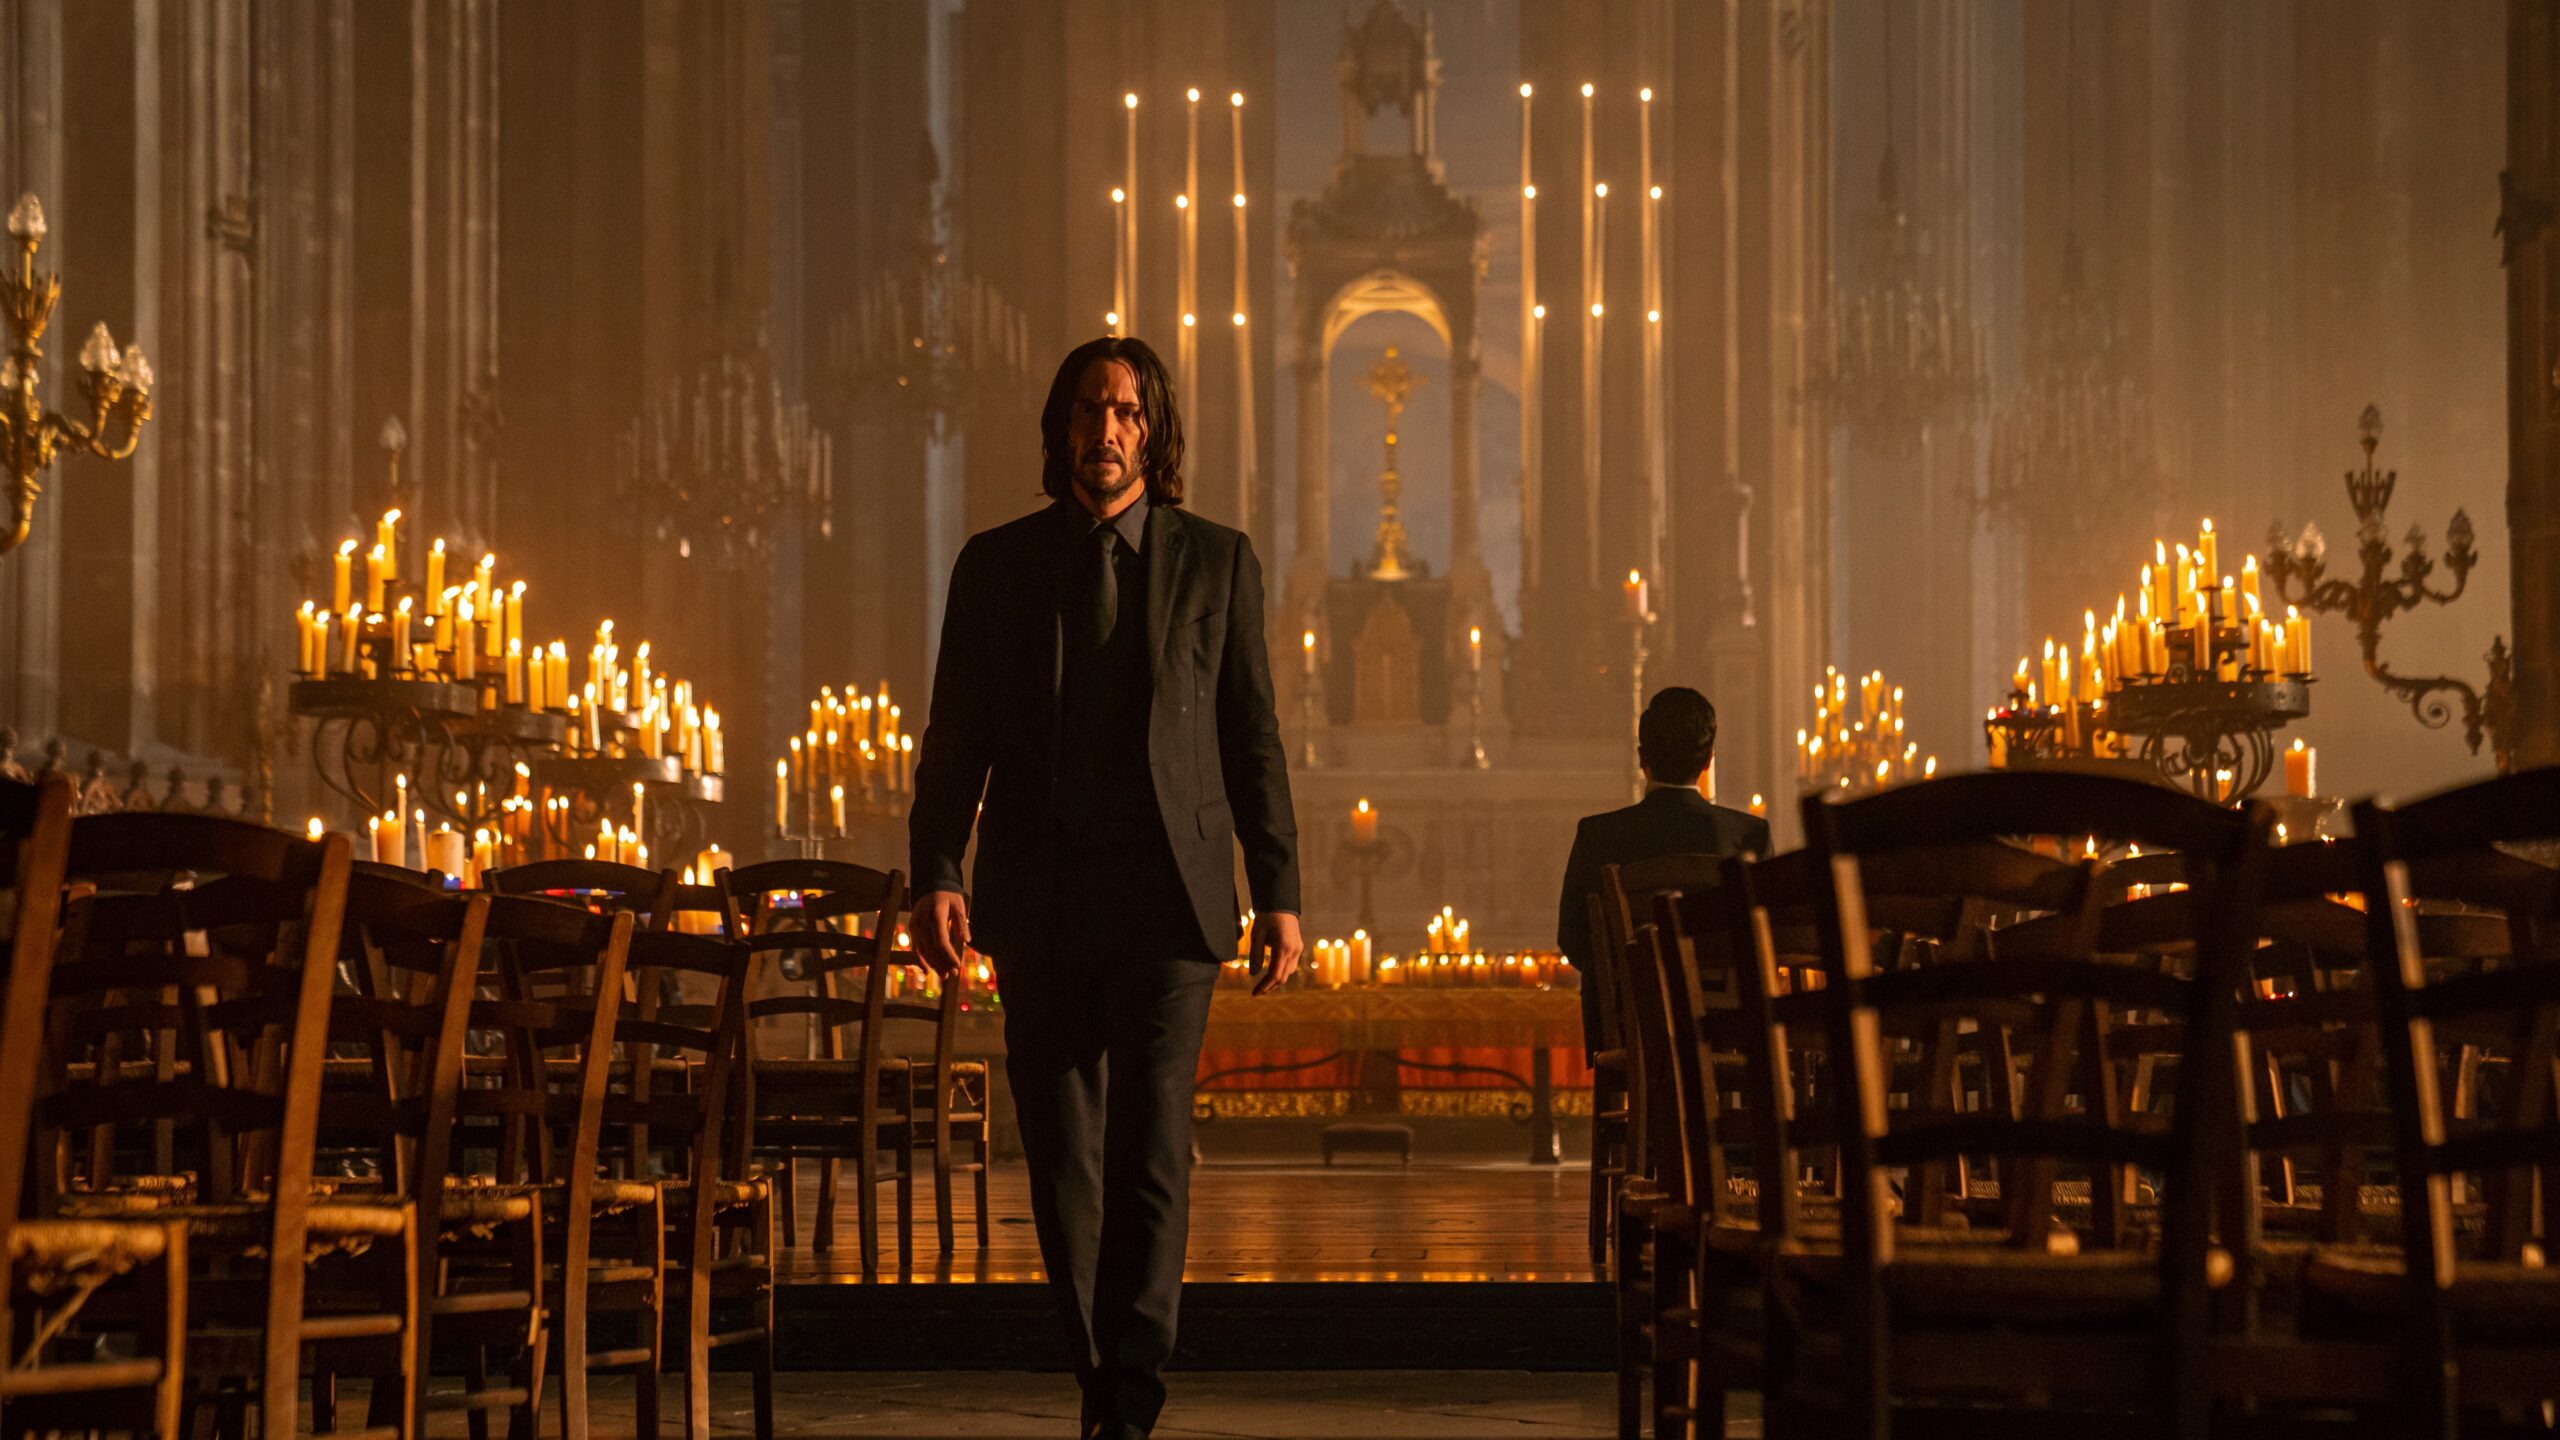 Keanu Reeves' John Wick 5 Update Given By Director Chad Stahelski